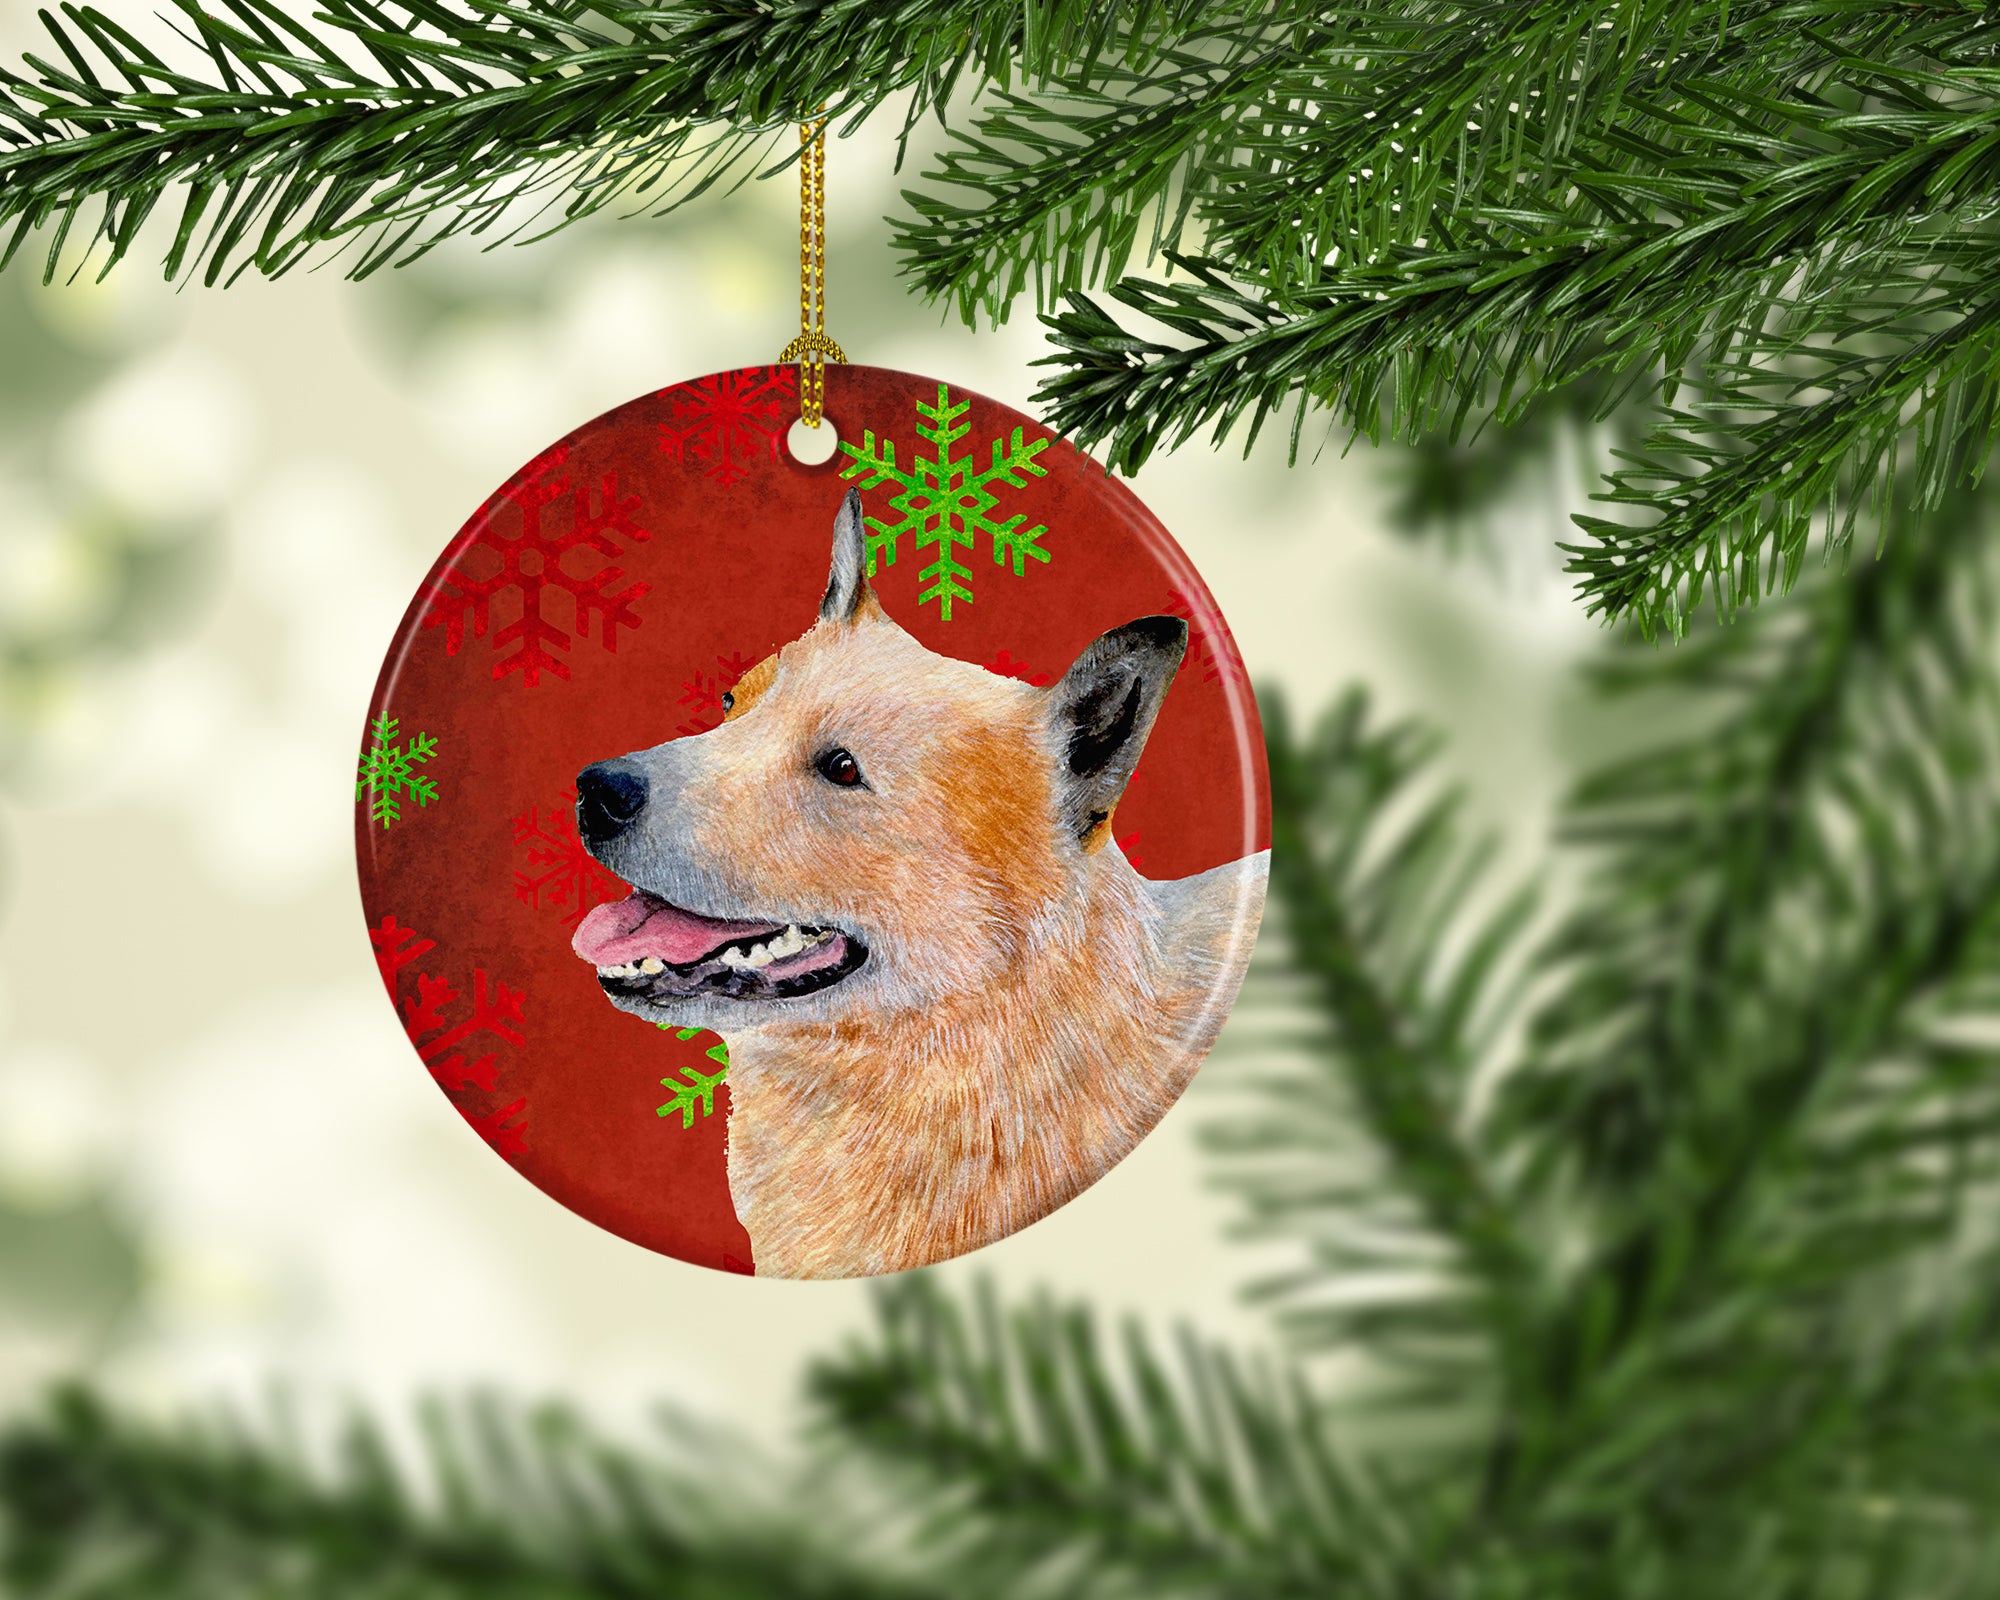 Australian Cattle Dog Red Snowflake Holiday Christmas Ceramic Ornament LH9317 - the-store.com